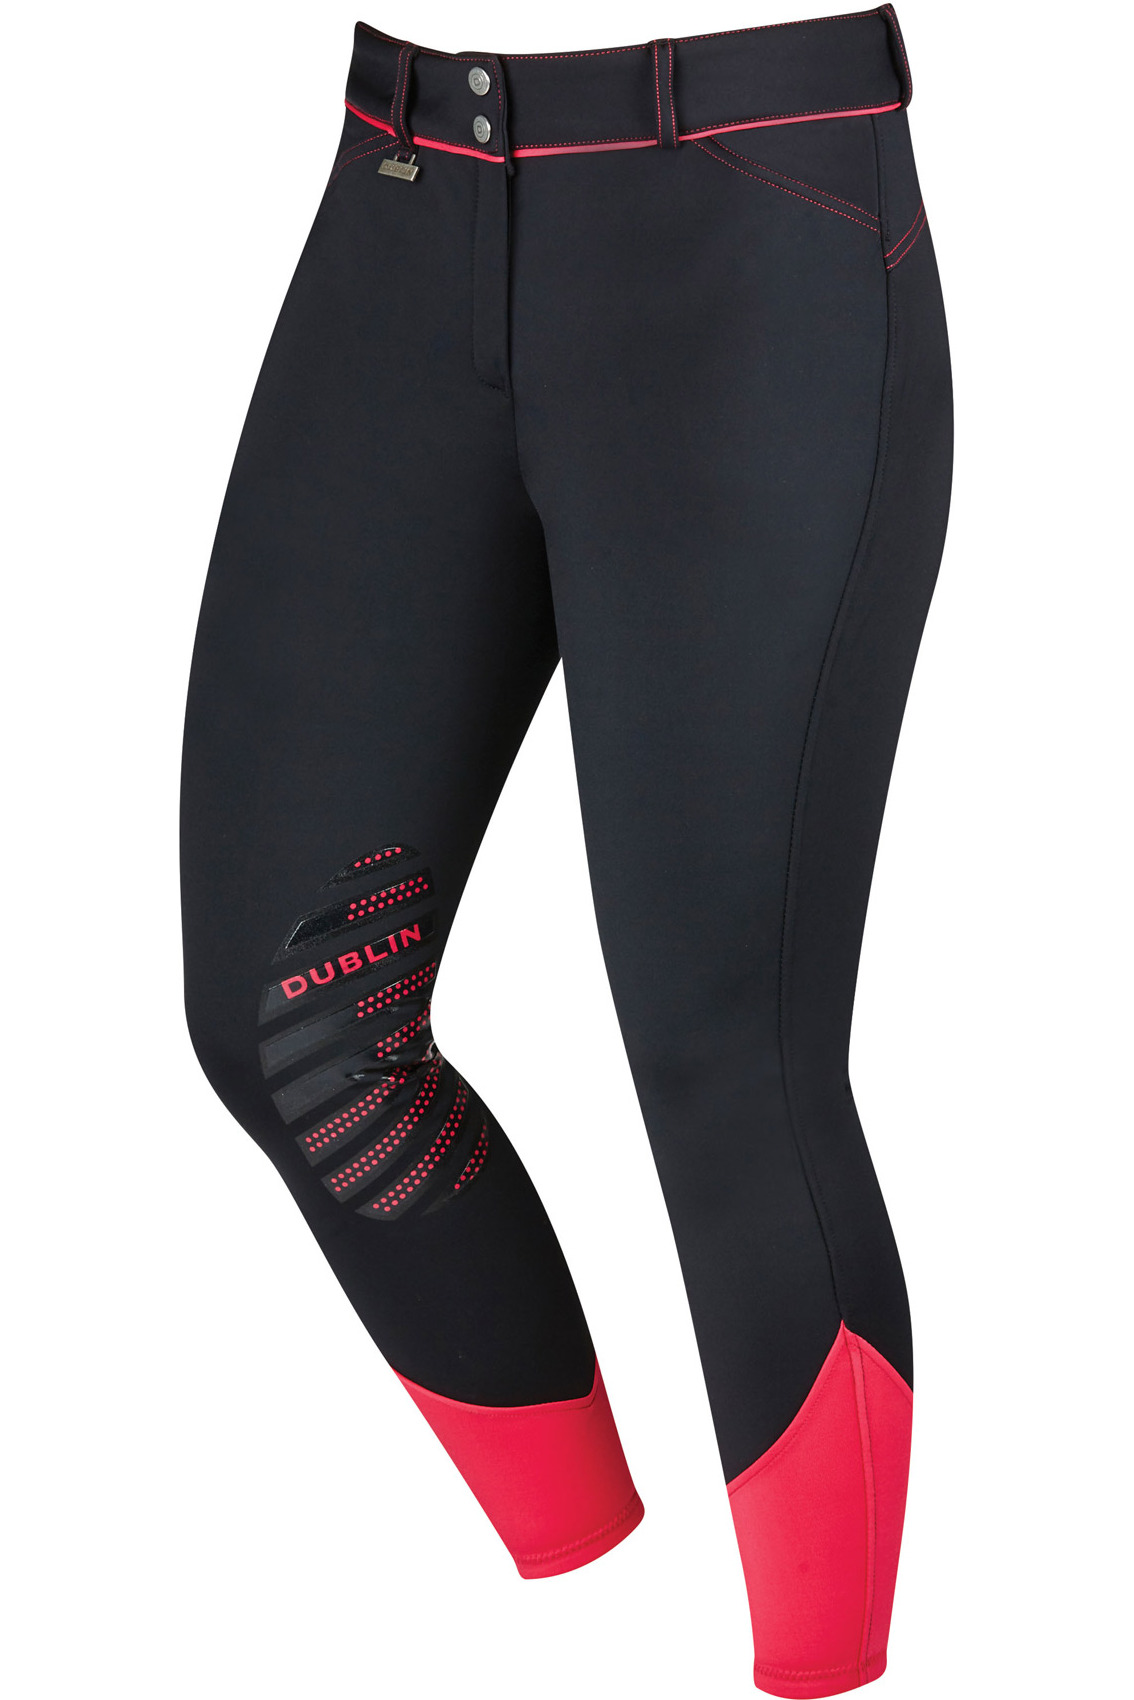 Dublin Thermal Womens Gel Knee Patch Breeches Black/Pink 